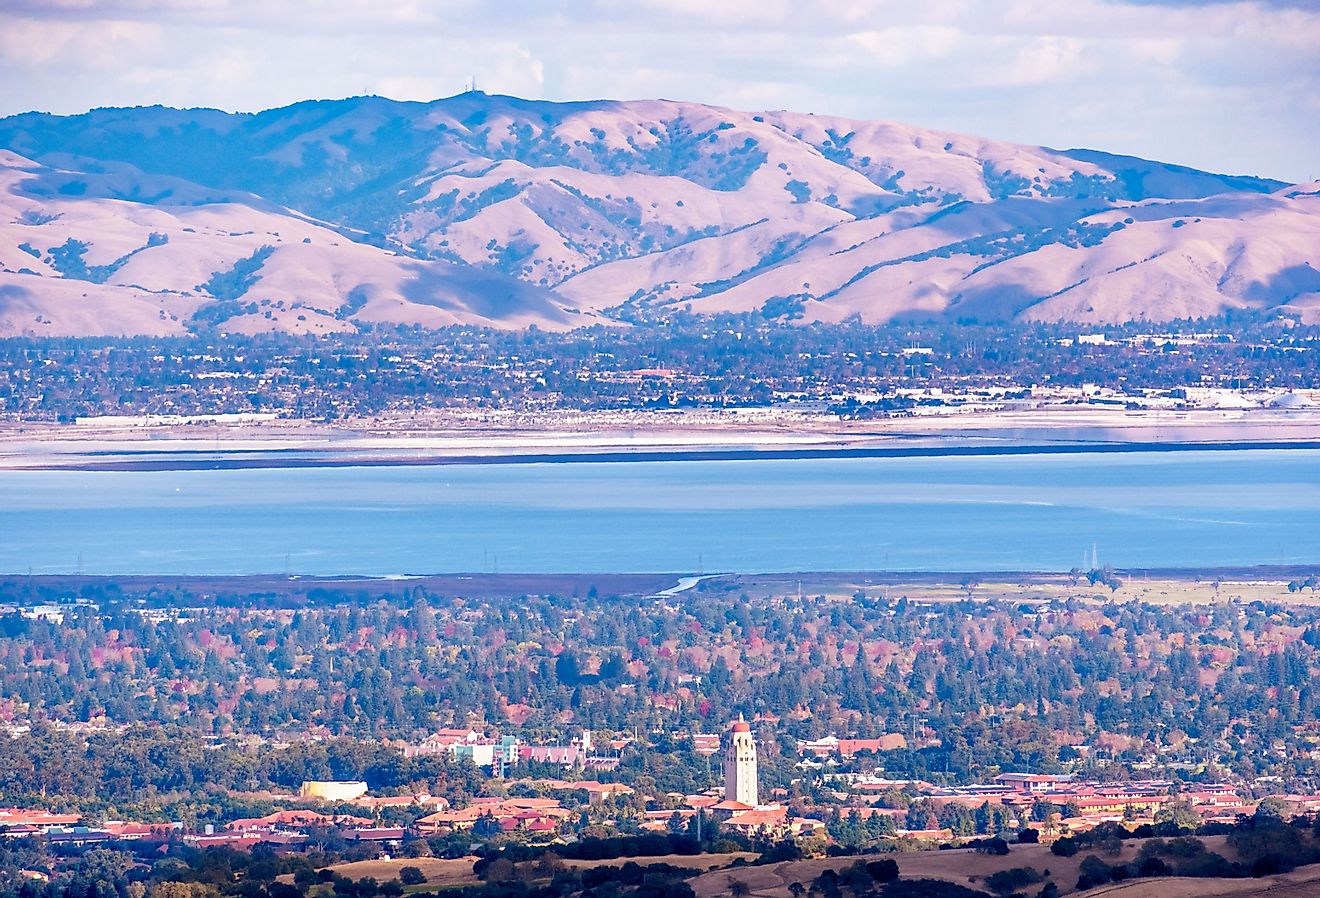 Aerial view of Palo Alto, San Francisco Bay Area; Newark and Fremont and the Diablo mountain range visible on the other side of the bay; Silicon Valley, California.